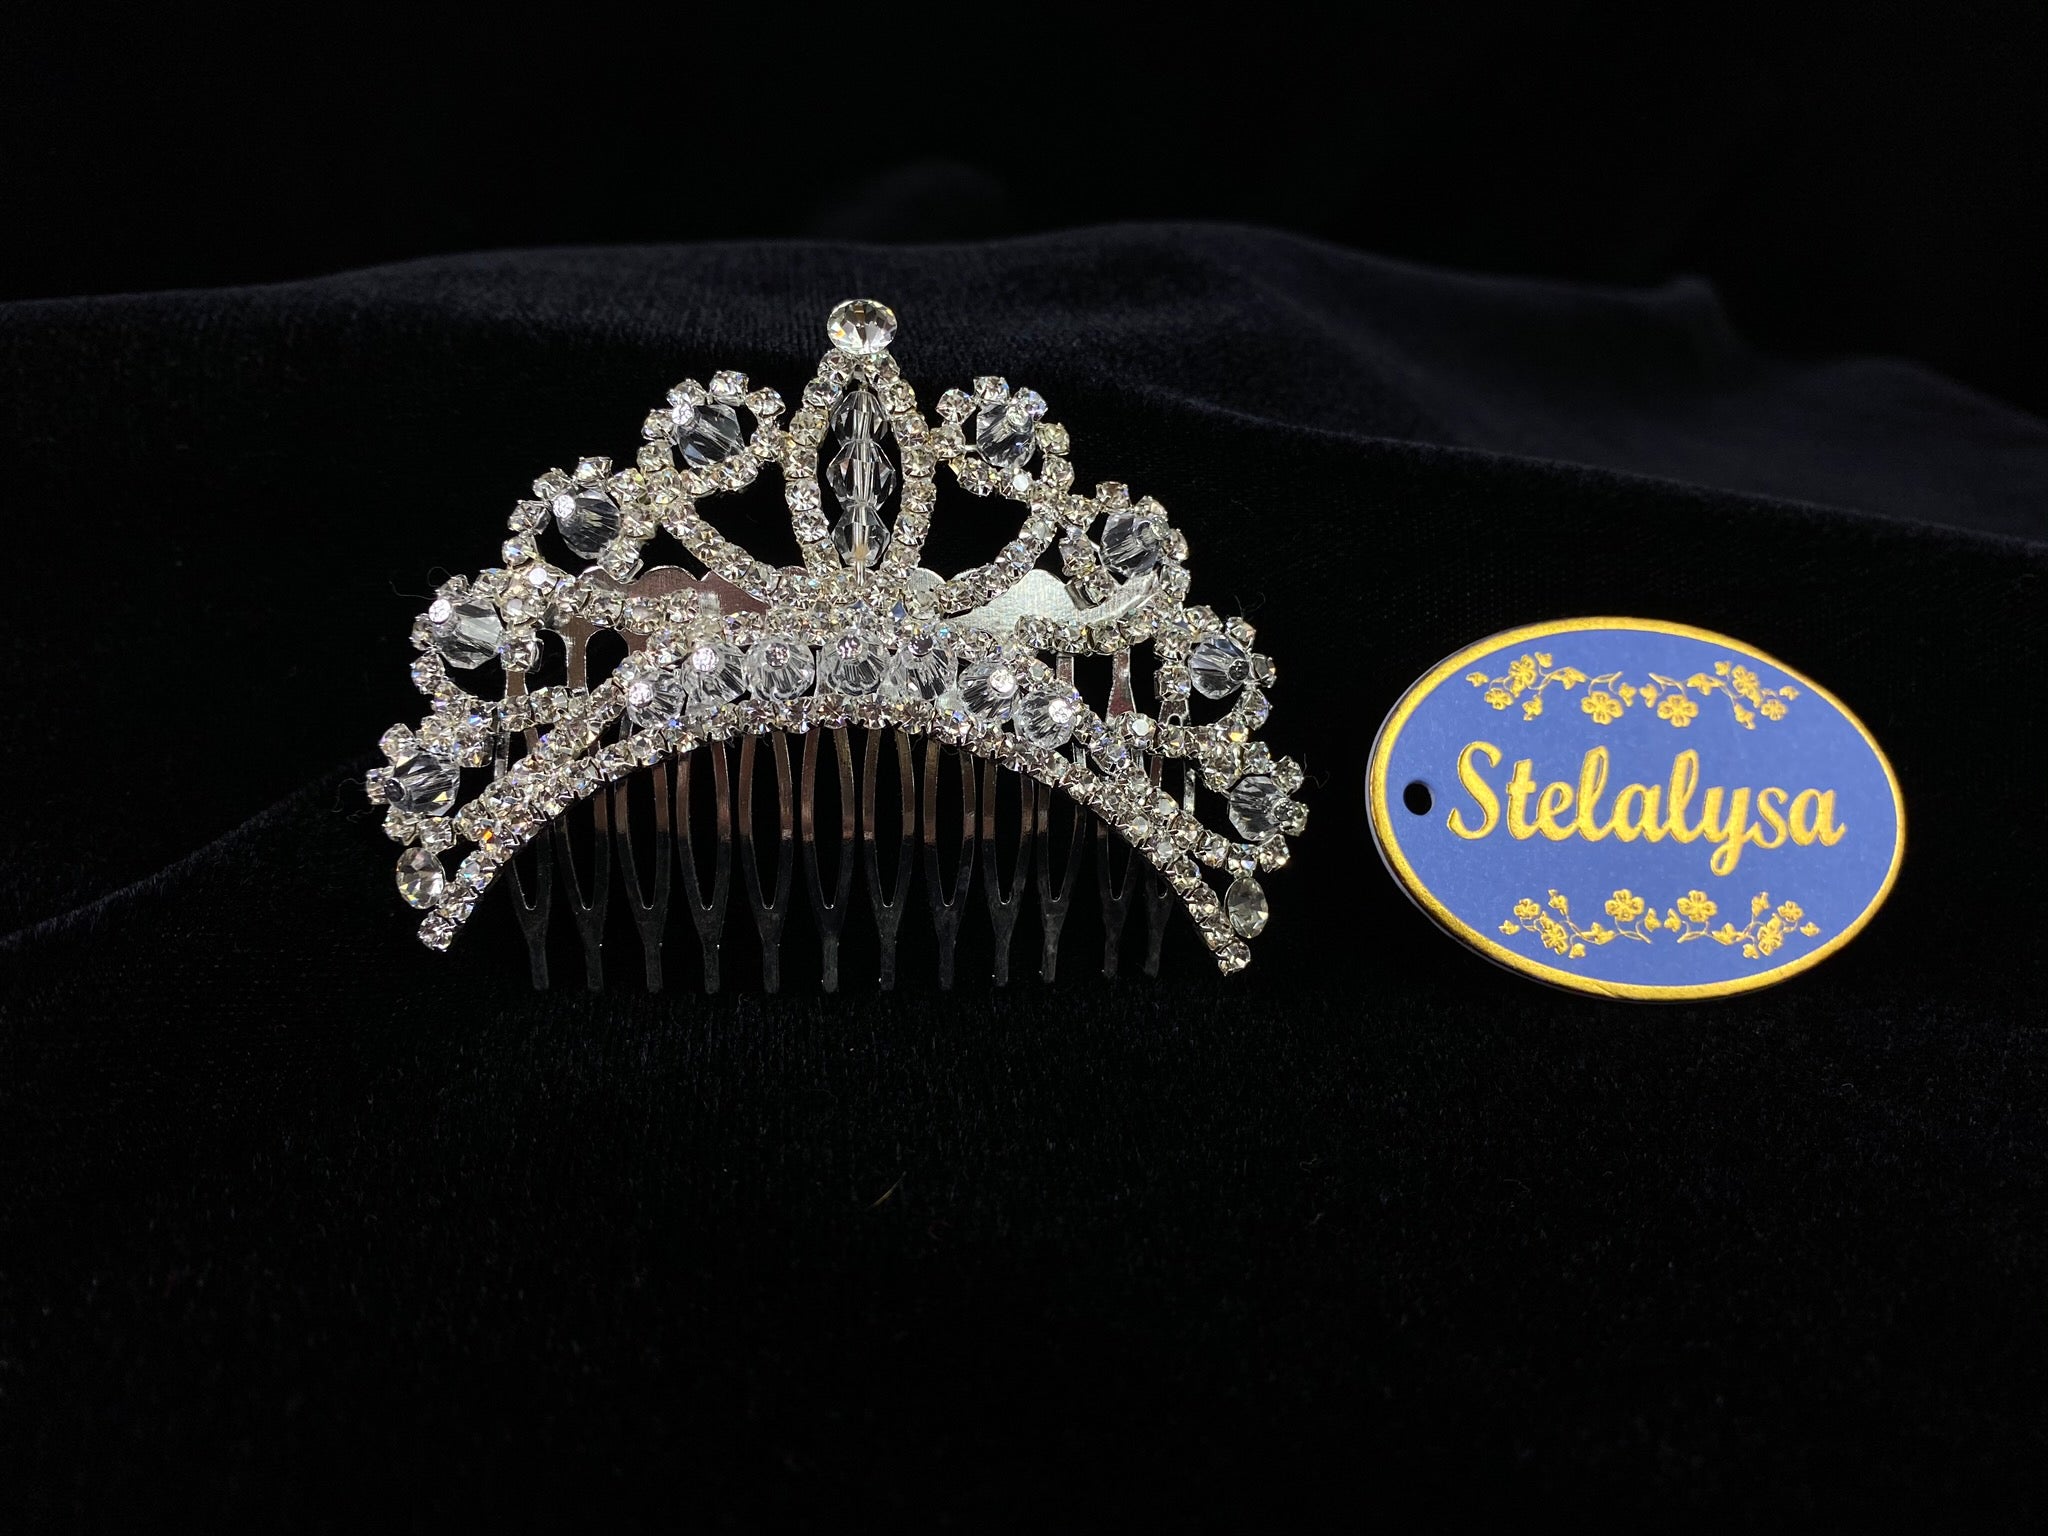 A must have for the First Communion!   Beautiful tiara, covered in gorgeous rhinestones with crystal detailing.  Tiara is 3" across.  Wear this tiara with either a white or ivory veil from our Veil Collection to complete the look for the ceremony.